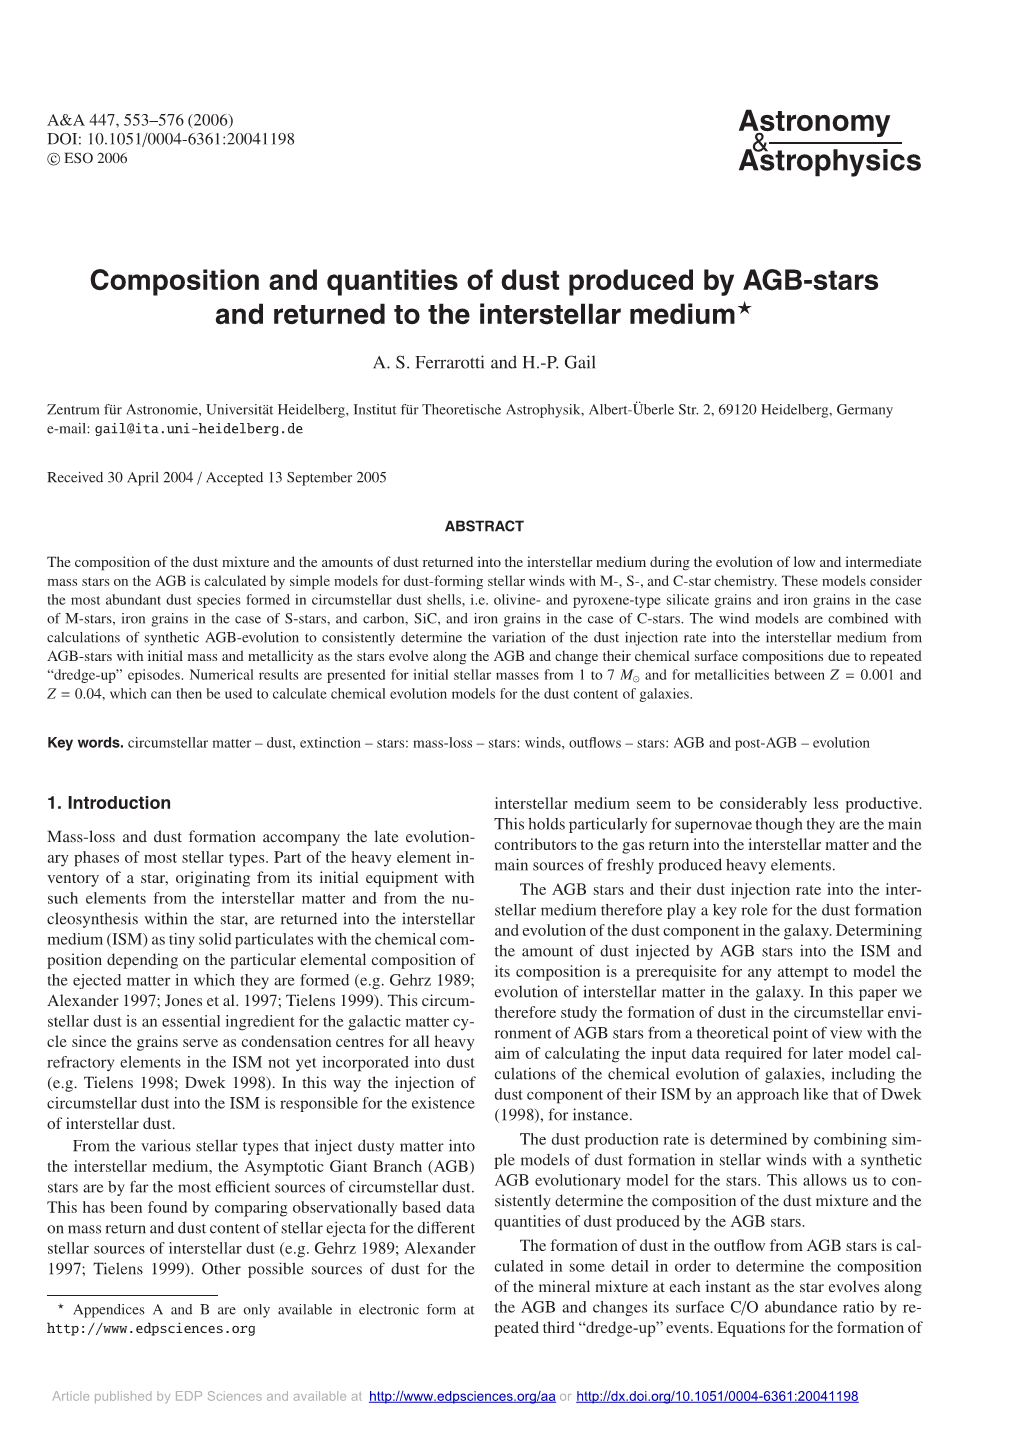 Composition and Quantities of Dust Produced by AGB-Stars and Returned to the Interstellar Medium